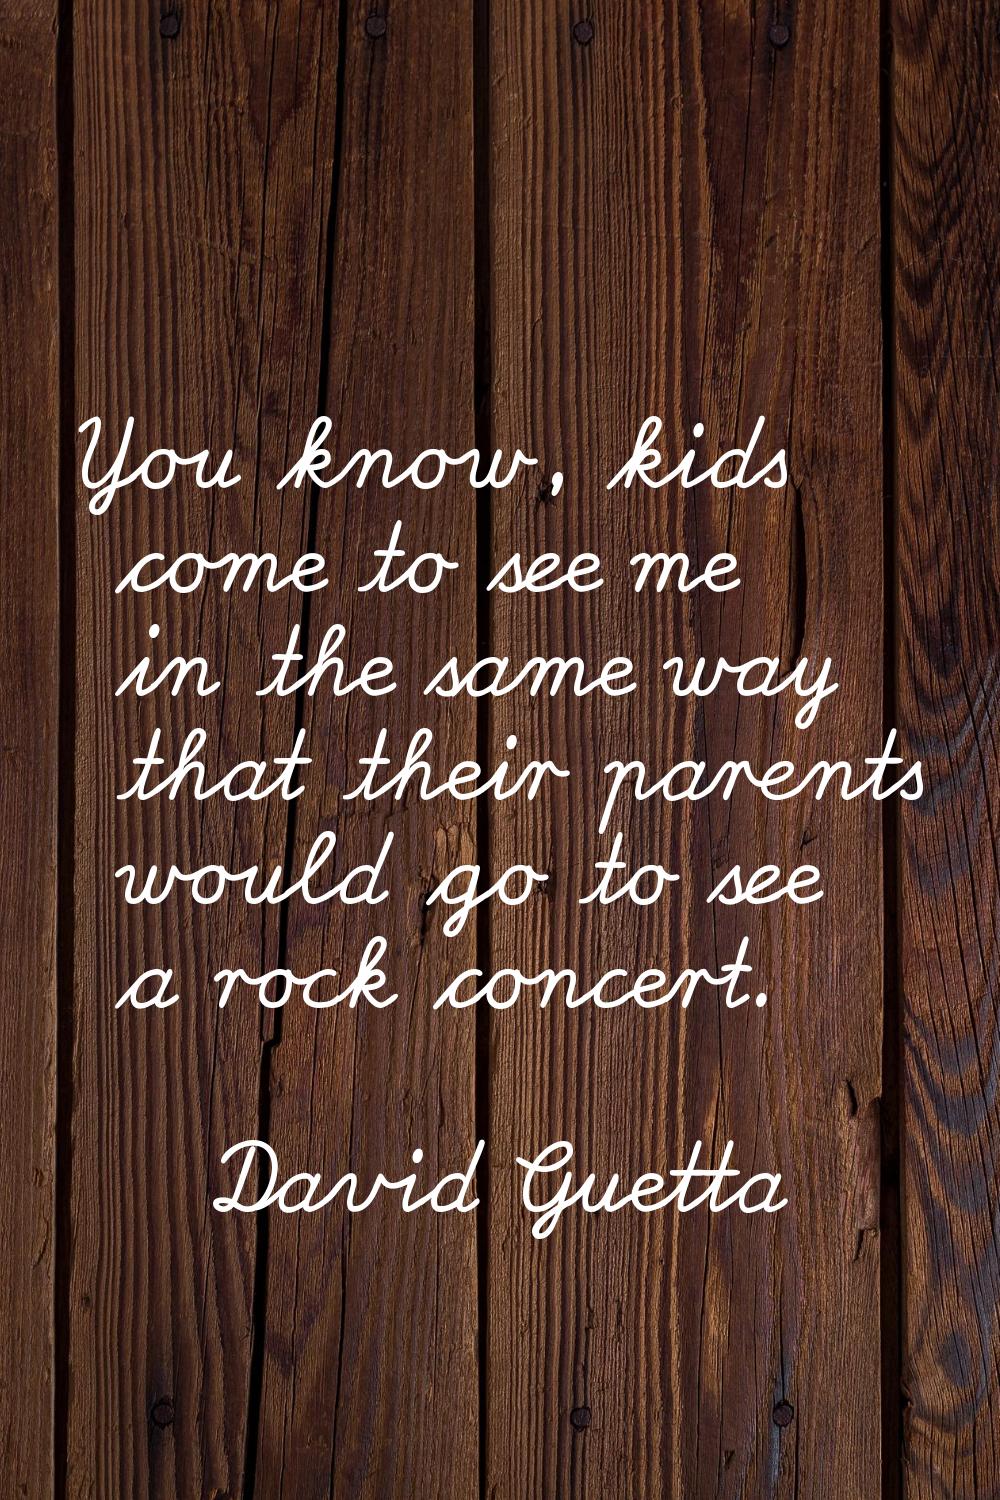 You know, kids come to see me in the same way that their parents would go to see a rock concert.